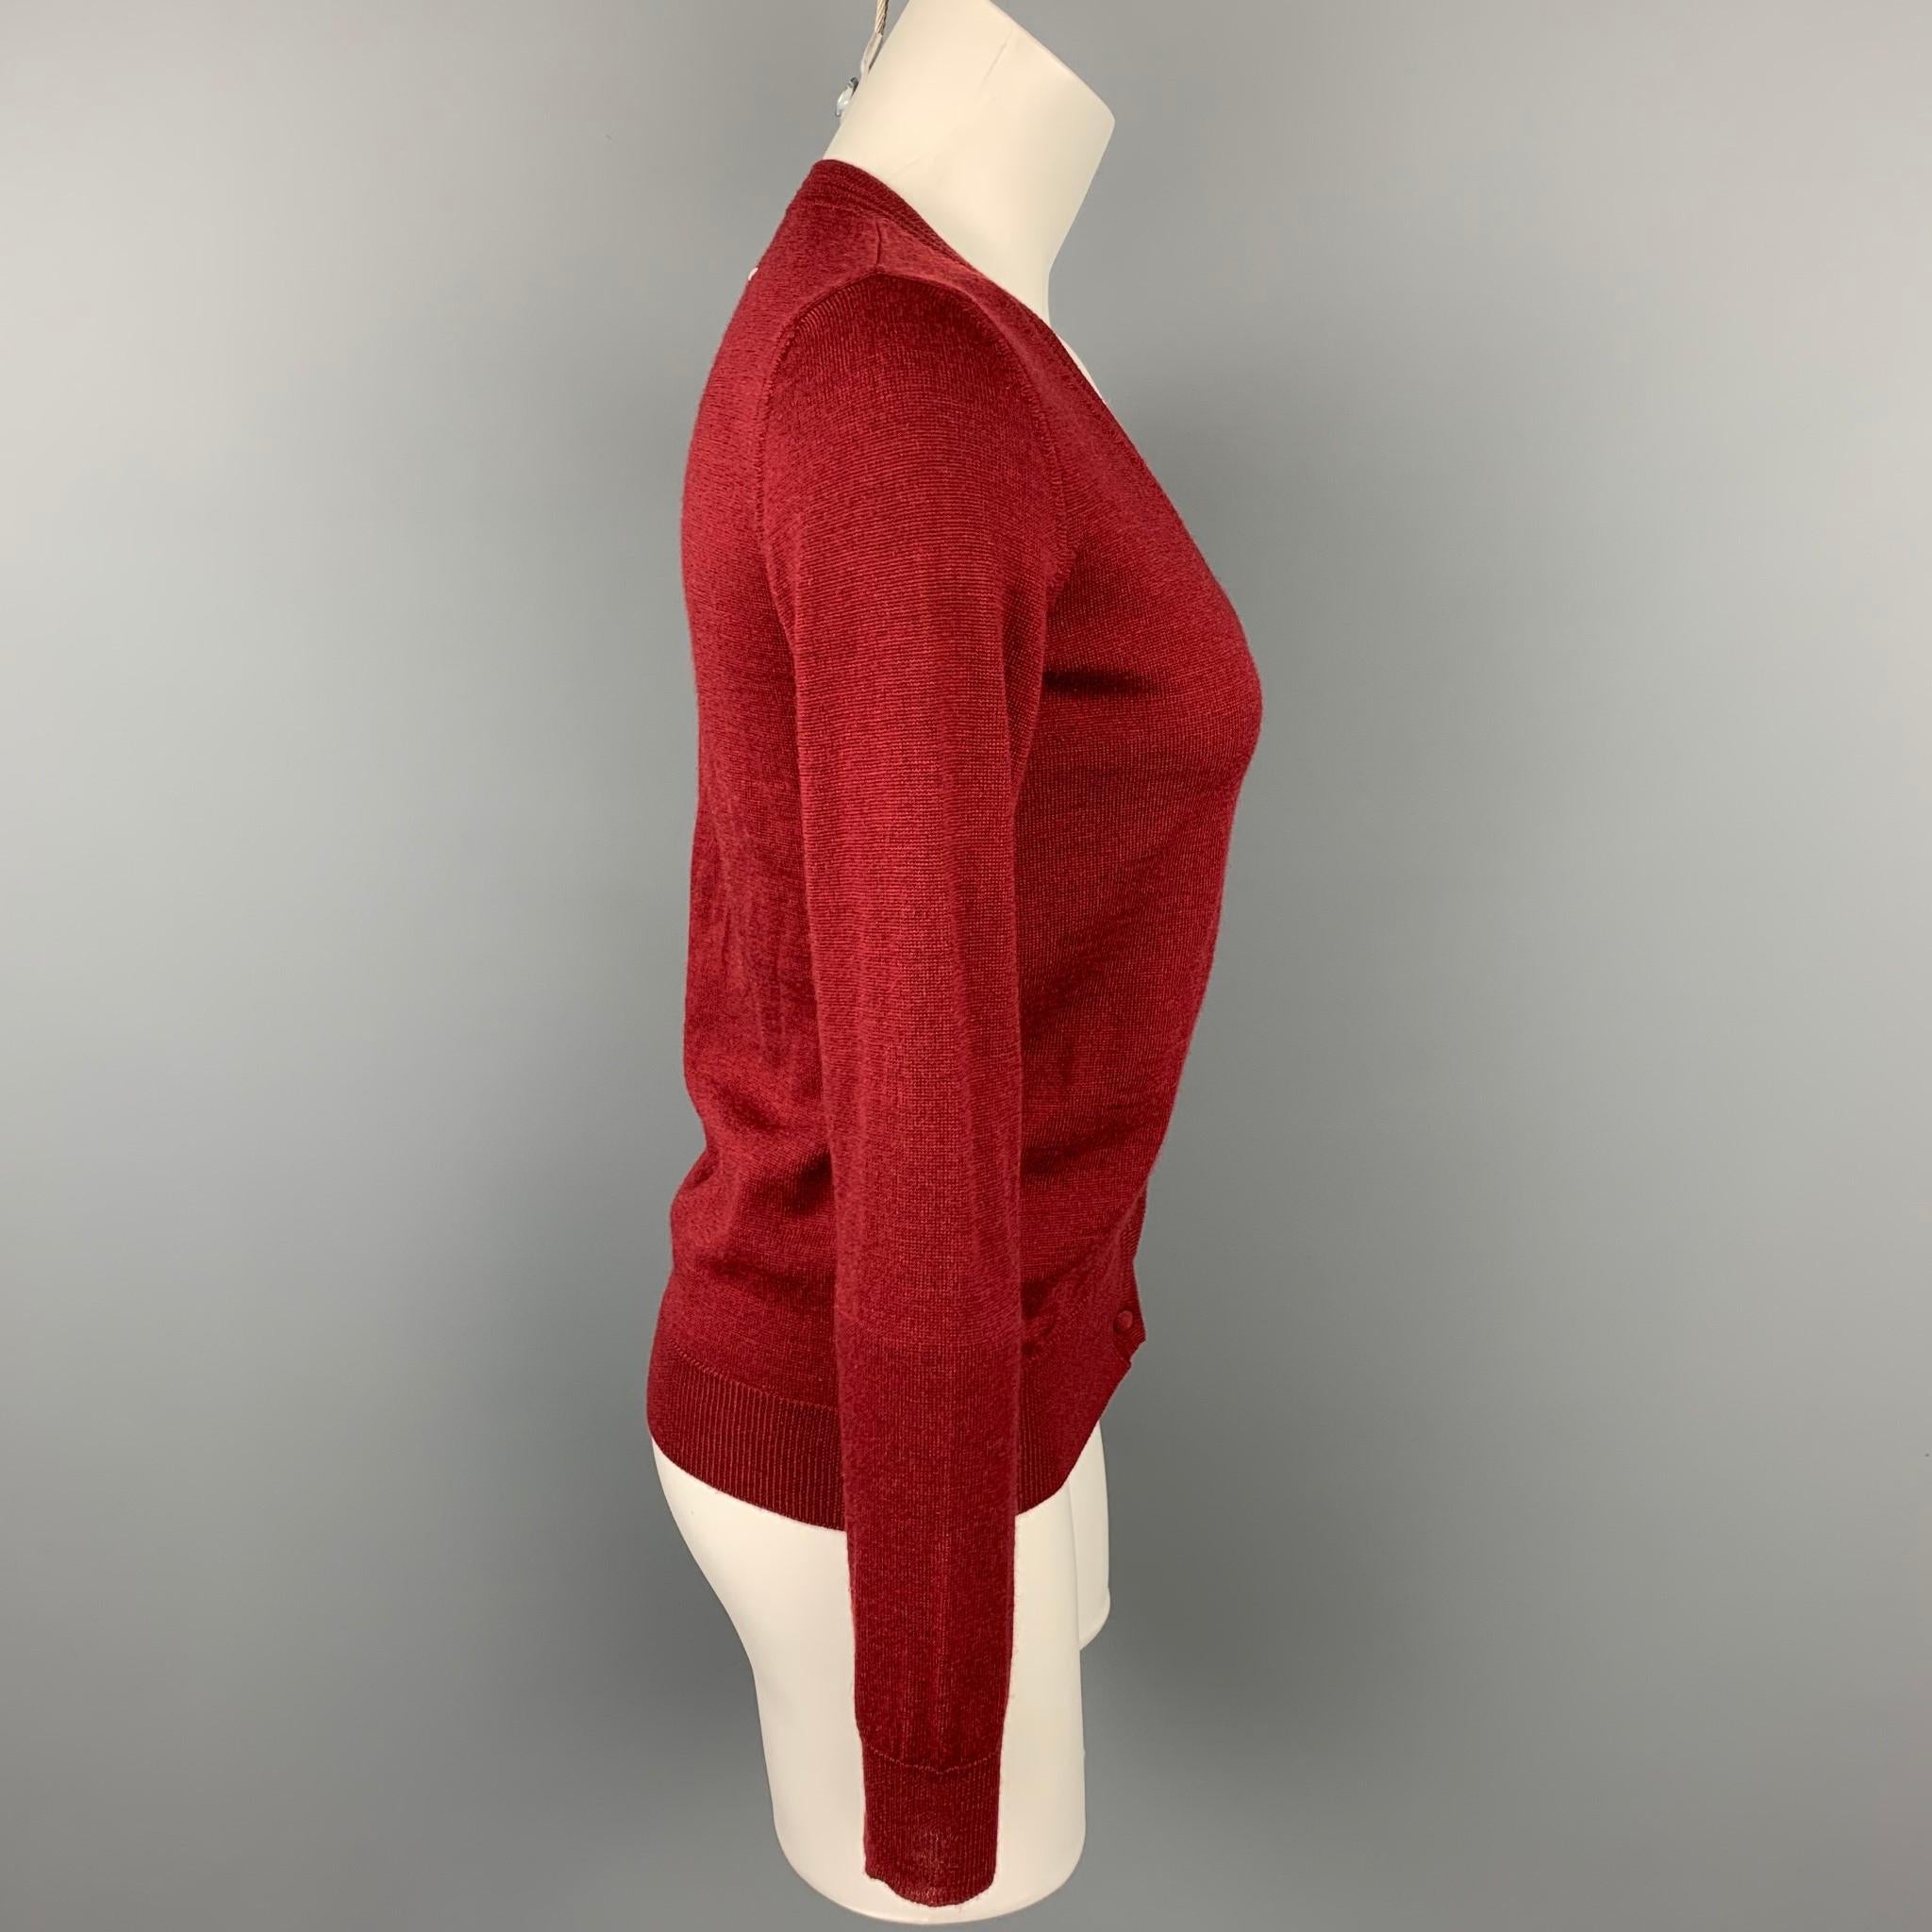 MAISON MARTIN MARGIELA cardigan comes in a burgundy wool featuring a covered button closure. Made in Italy.

Very Good Pre-Owned Condition.
Marked: S

Measurements:

Shoulder: 15 in.
Bust: 34 in.
Sleeve: 26 in.
Length: 23.5 in. 